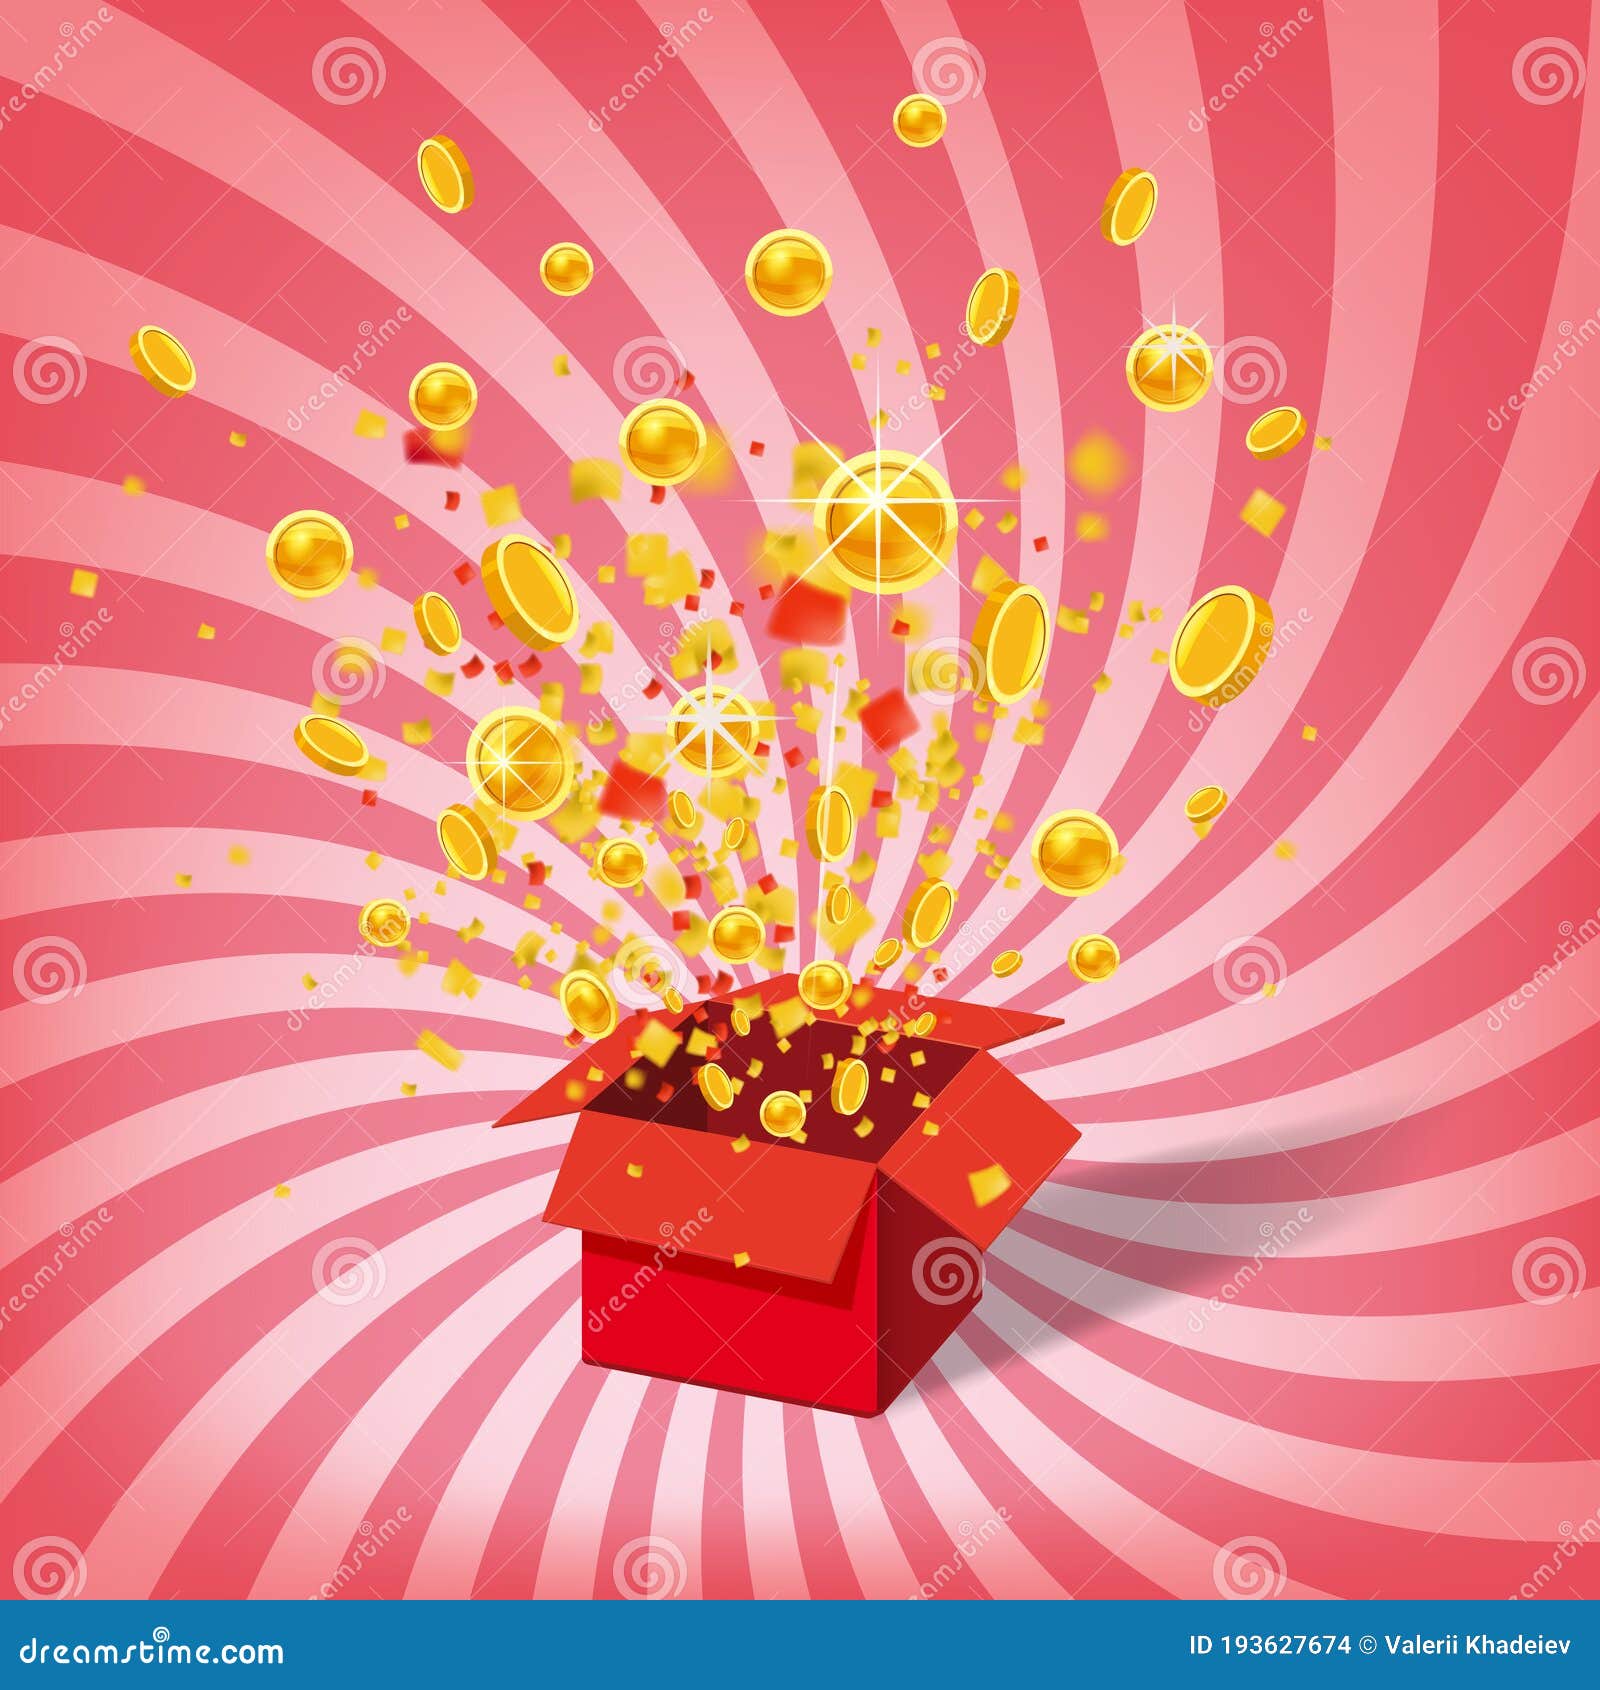 box with coins exploision, blast. open red gift box and confetti. win, casino, lottery, quiz. spiral stripes background